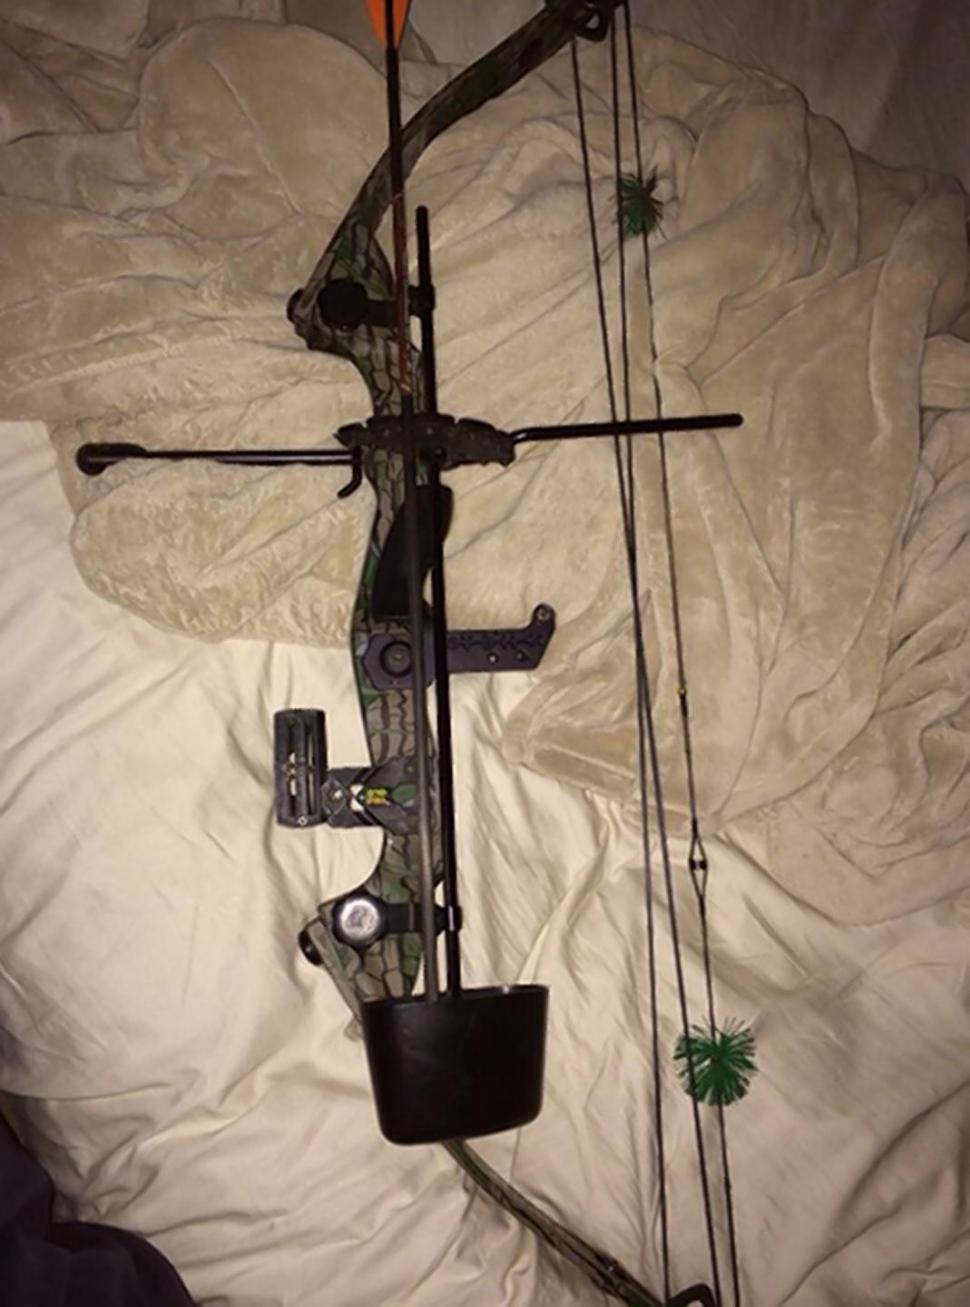 Mason Whitaker tagged Brown's boyfriend Nick Gordon in some of the weapons pics.